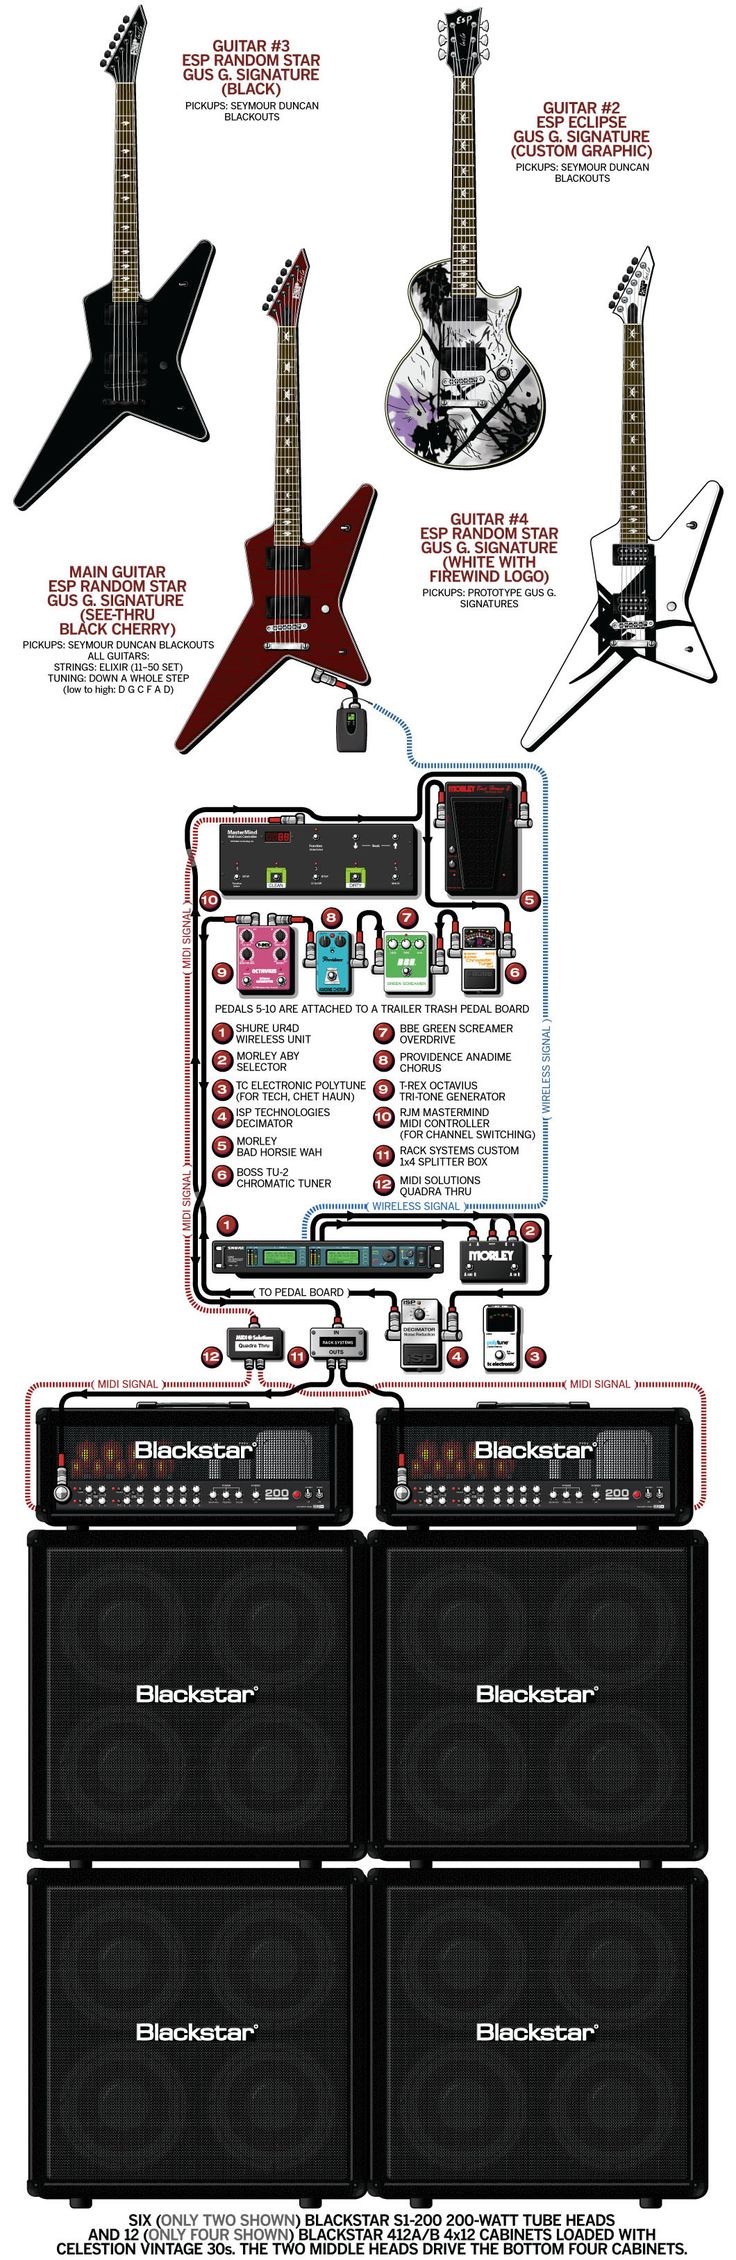 A detailed gear diagram of Gus G s 2011 Ozzy Osbourne stage setup that traces the signal